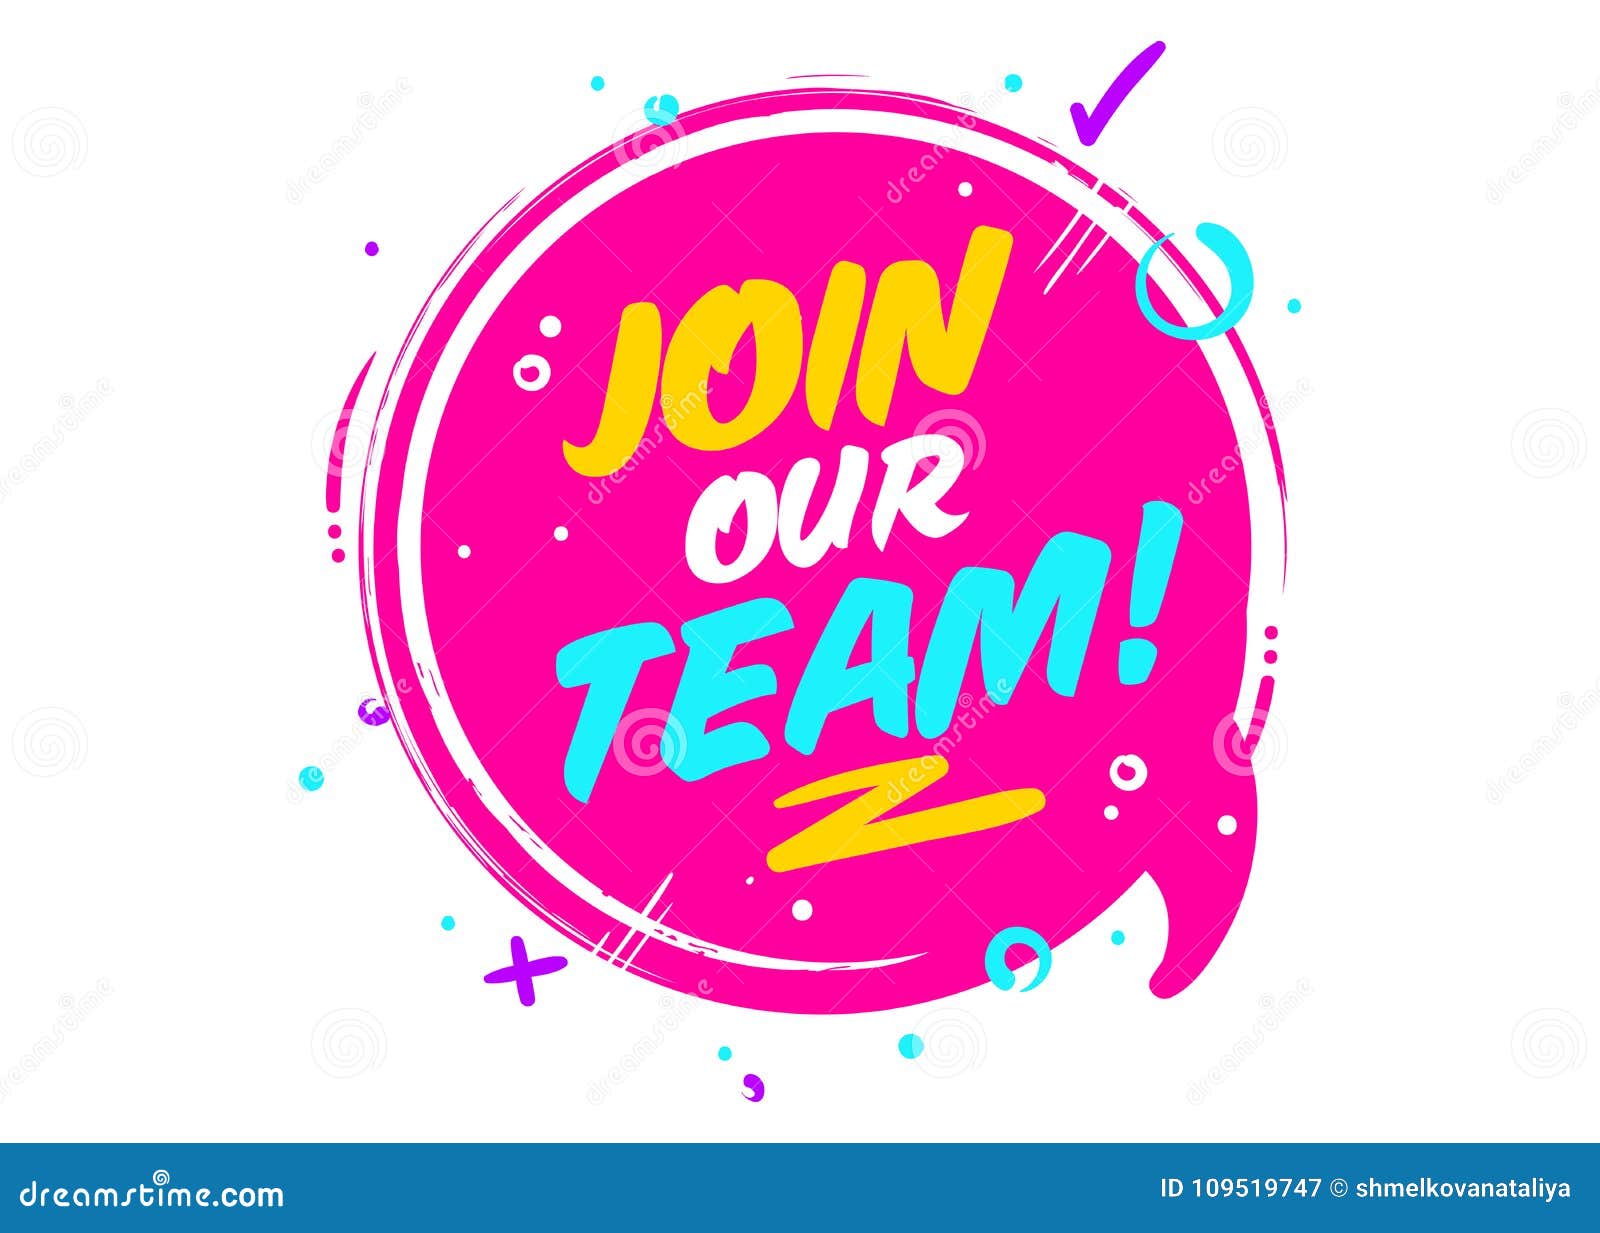 join our team.  icon  on white. pink rounded sign